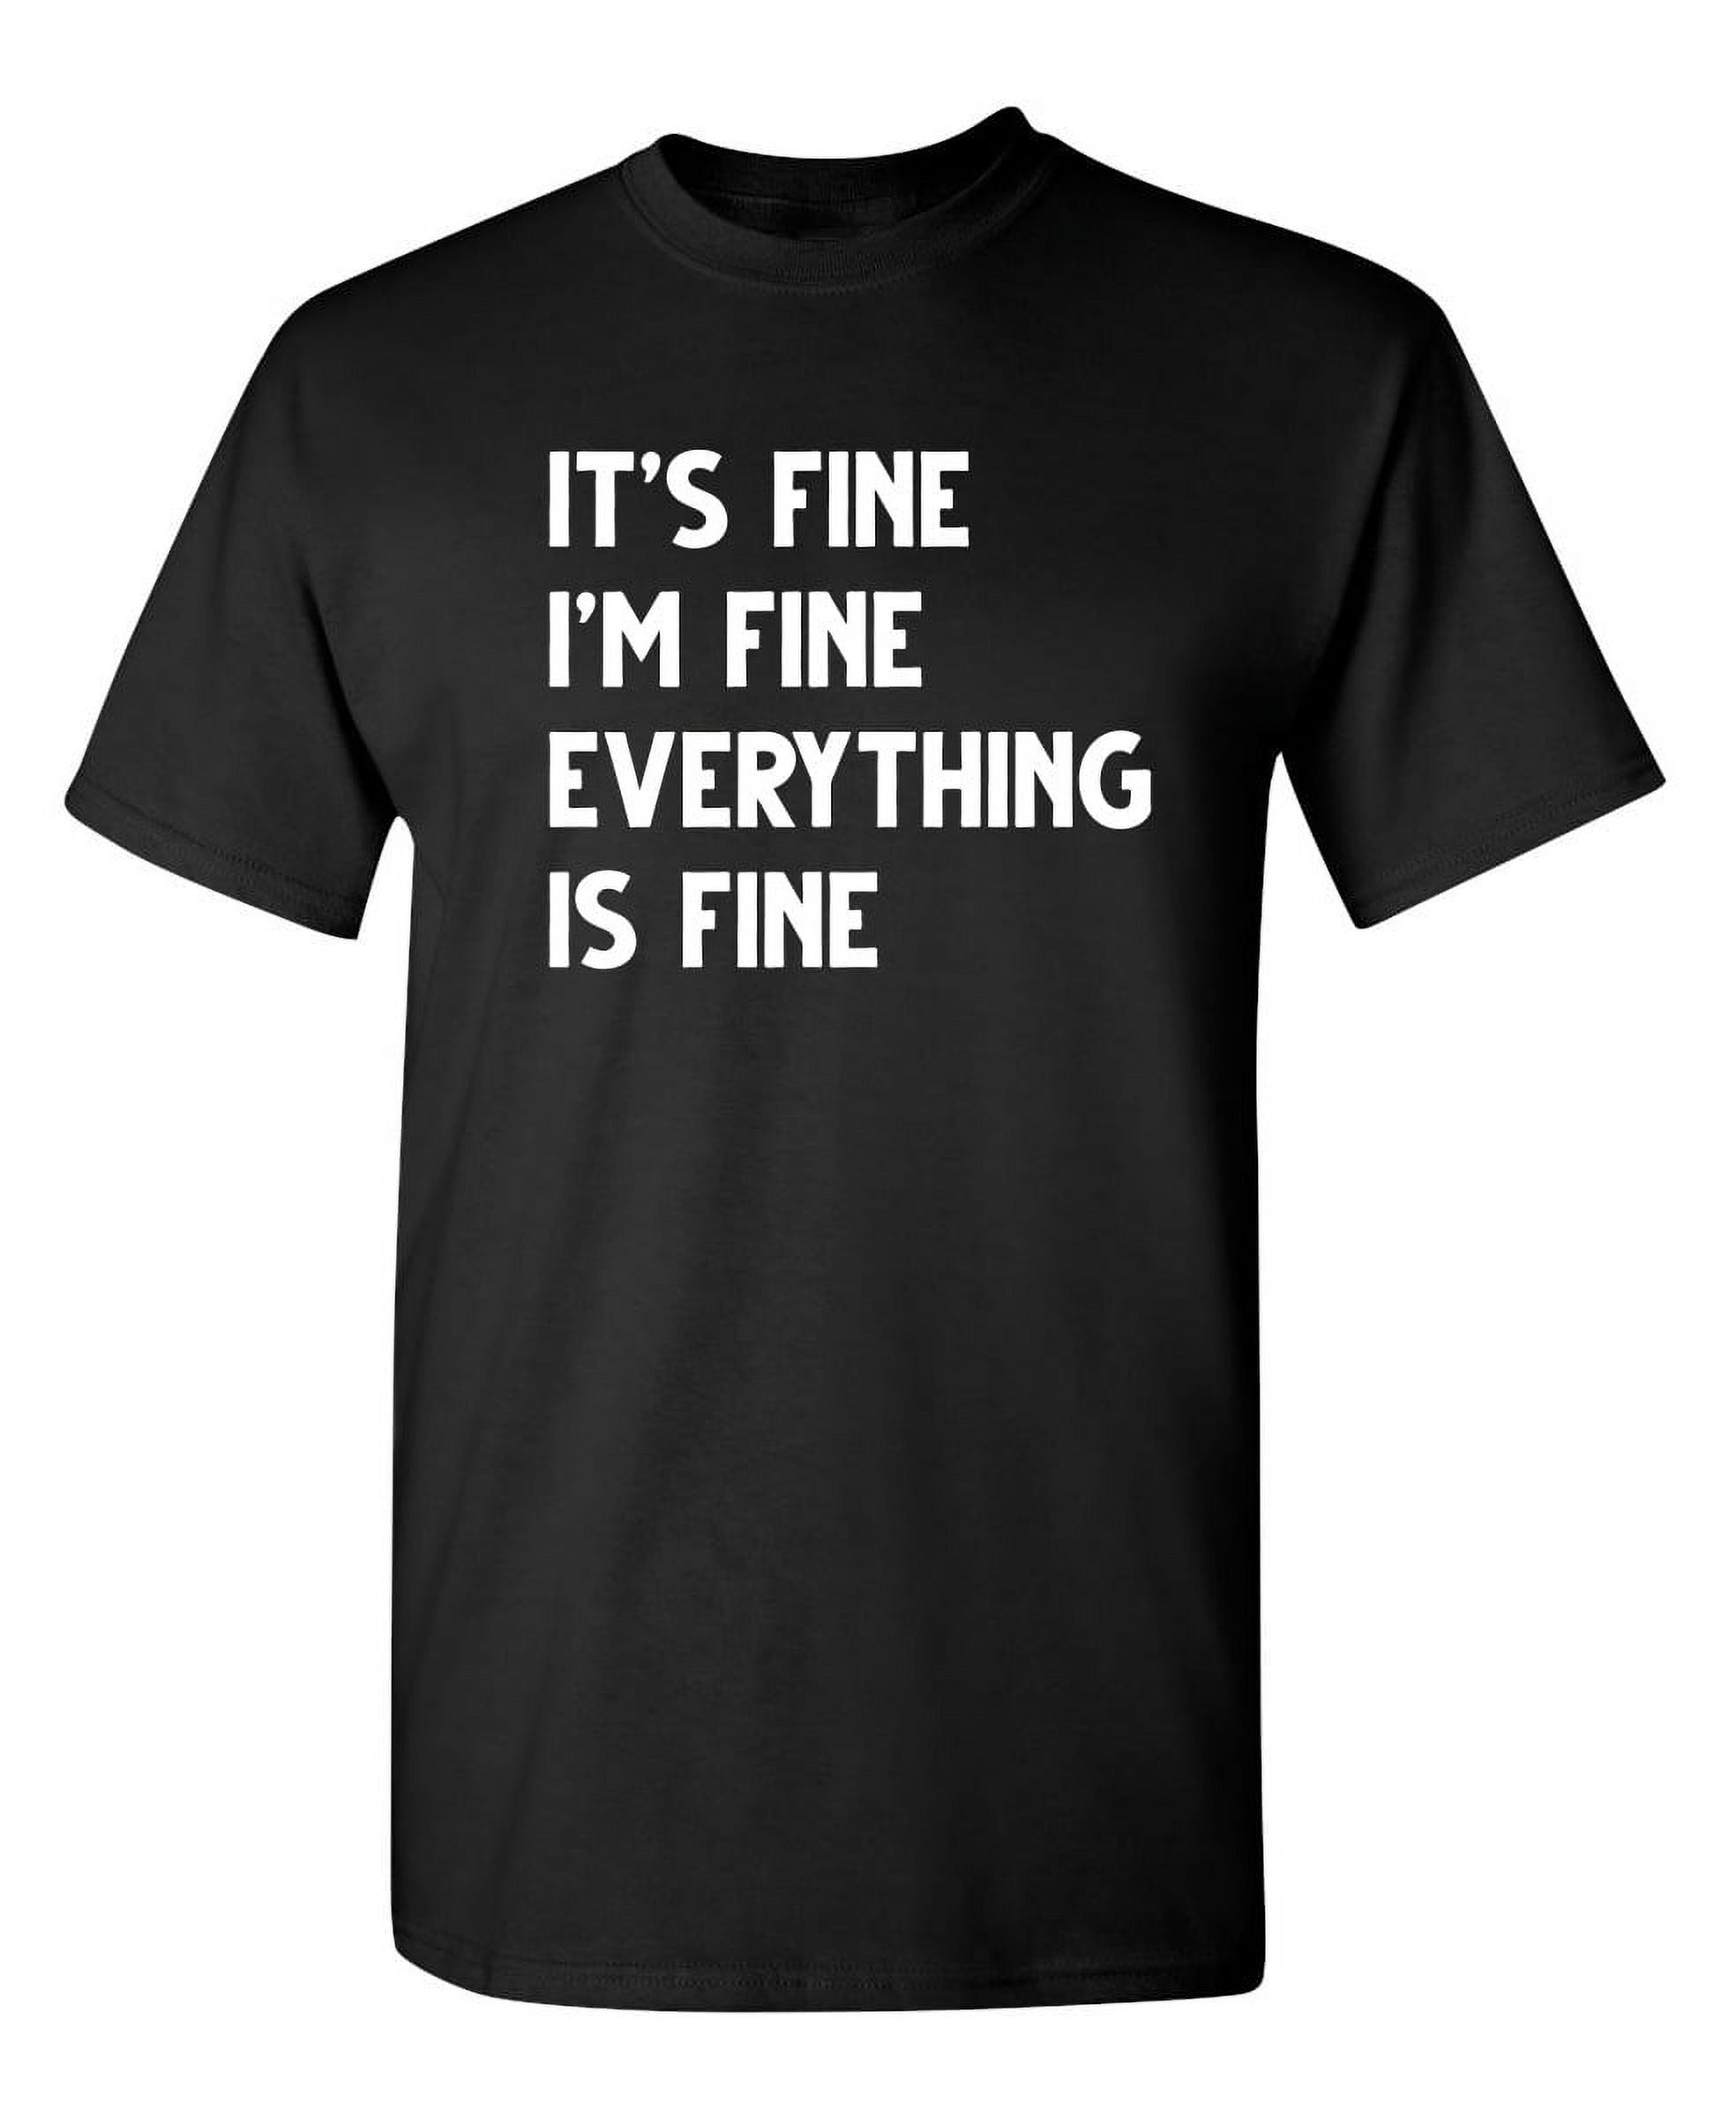 It's Fine I'm Fine Everything Is Fine Sarcastic Humor Graphic